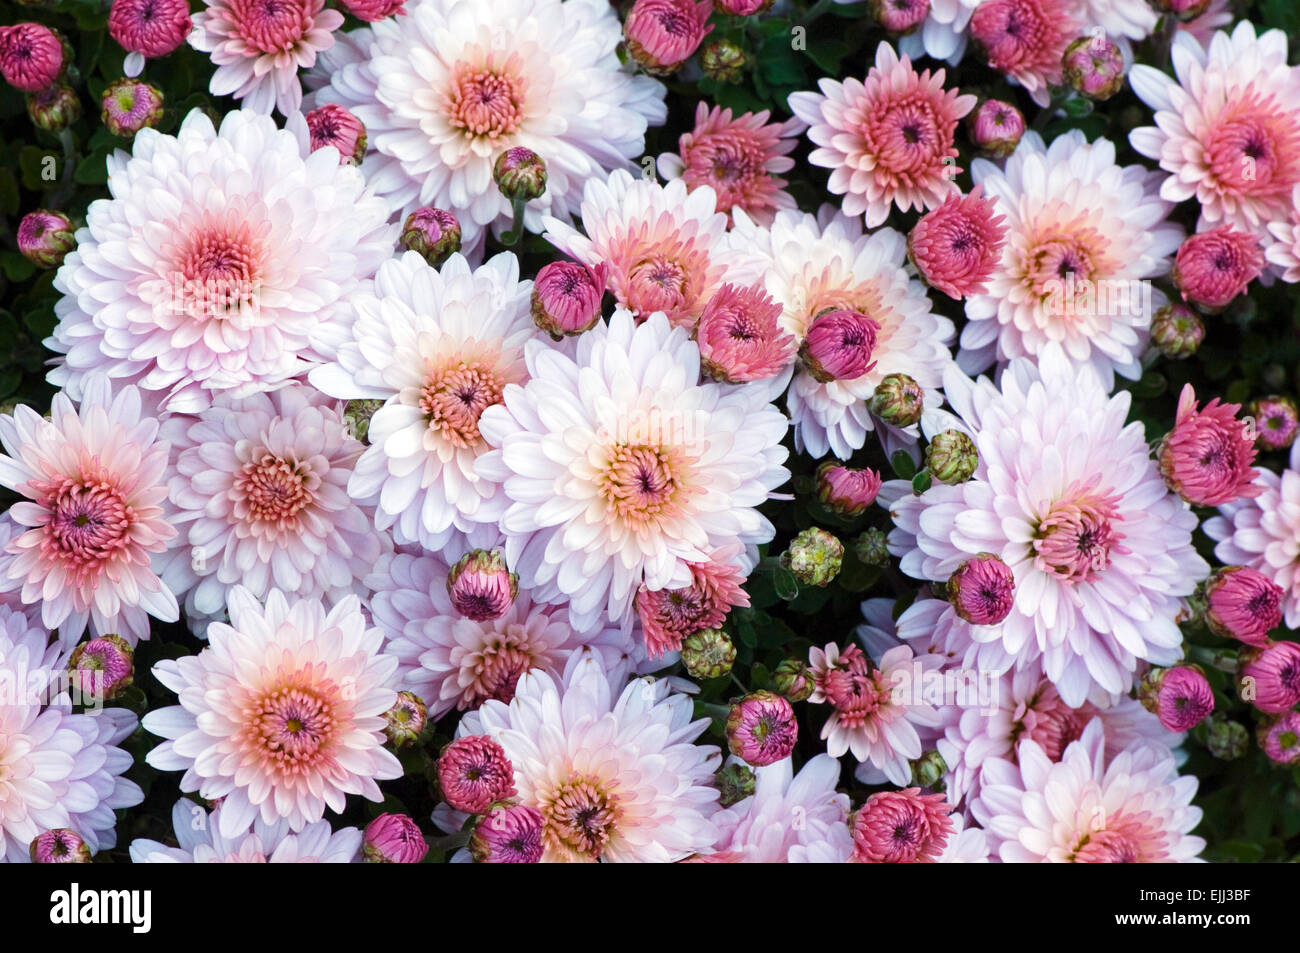 A group of pink and white chrysanthemums blooming in the fall. Stock Photo